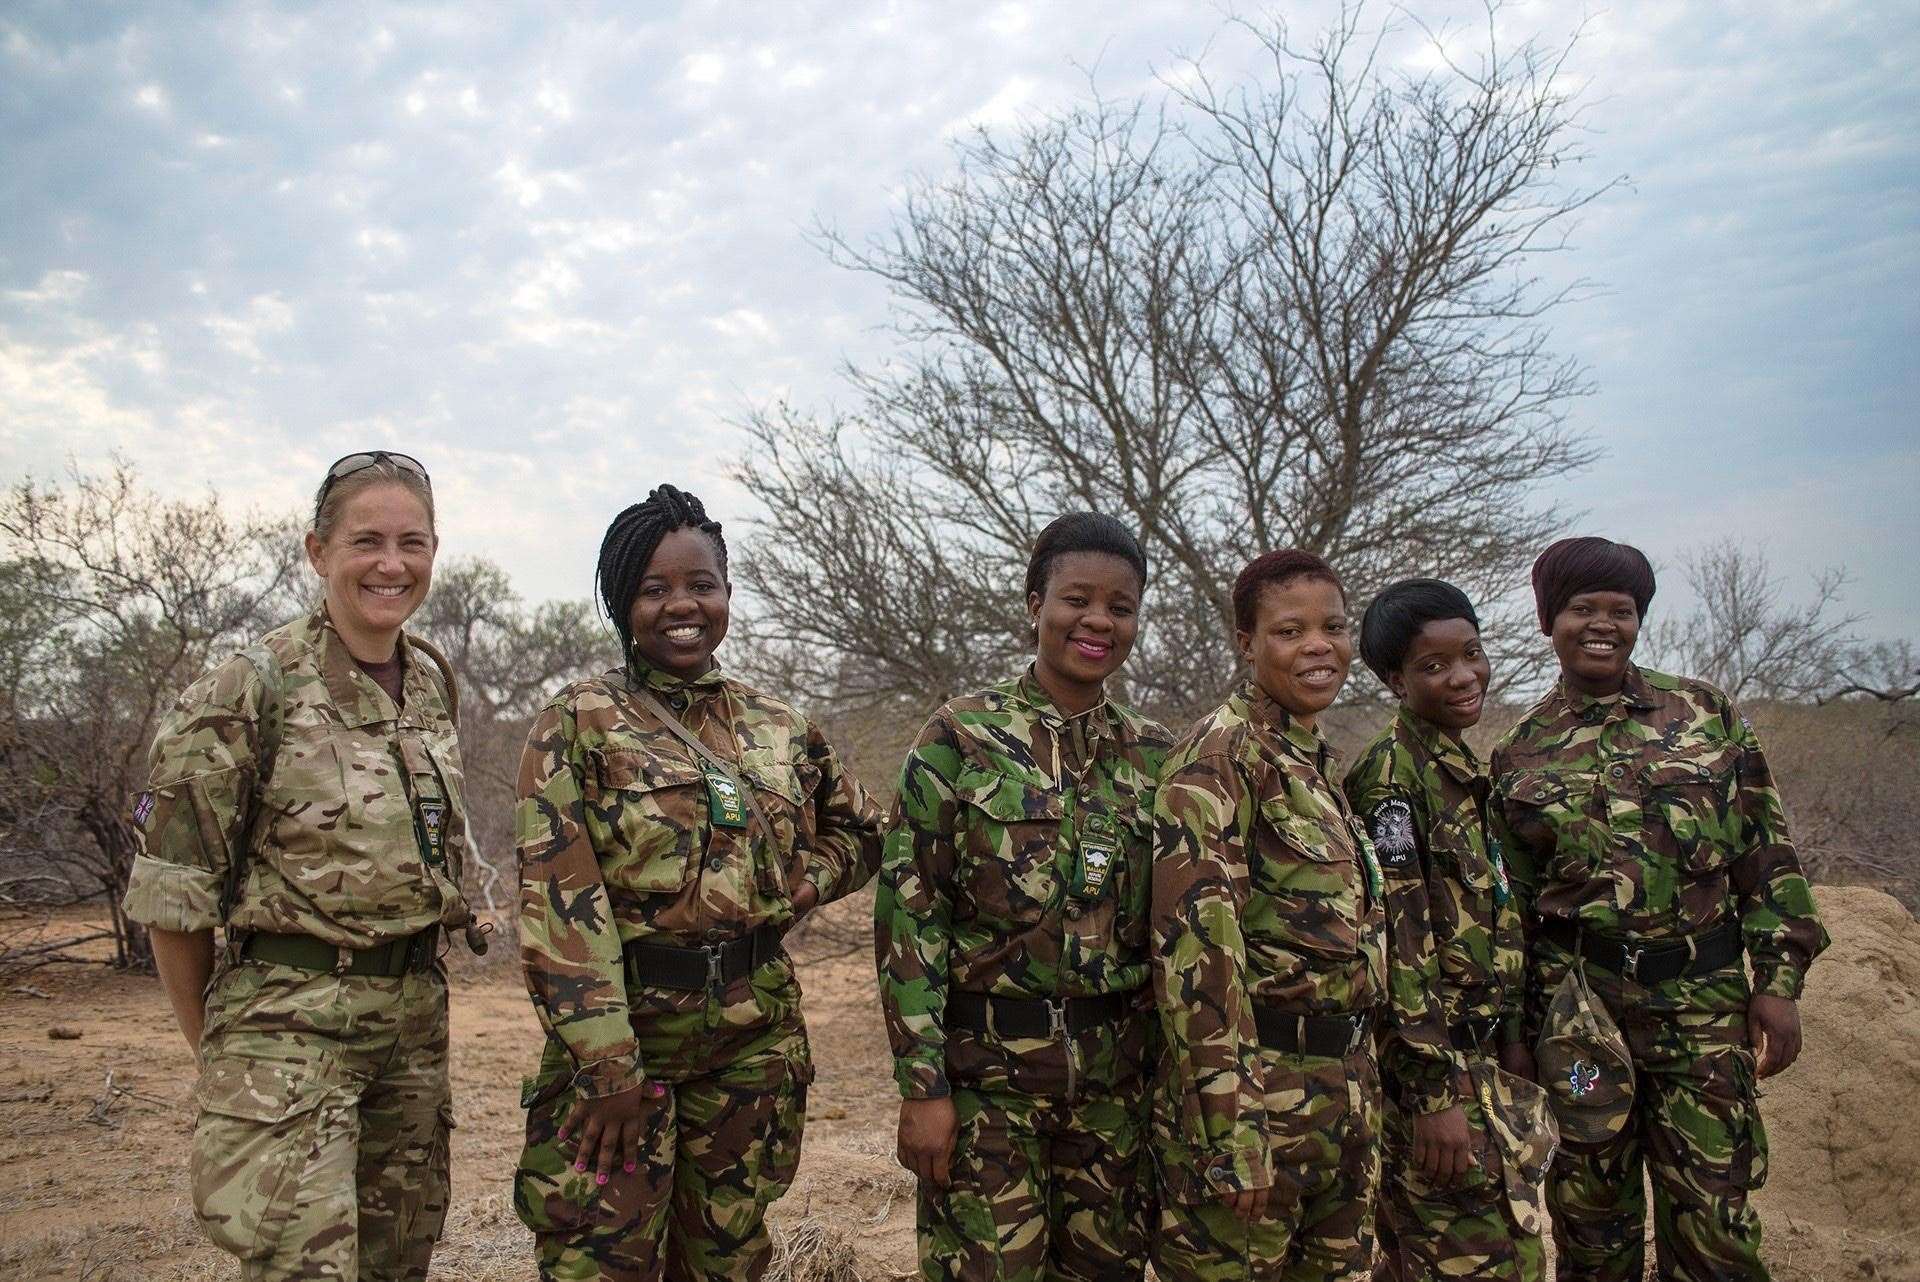 The Black Mambas unit patrol 50,000 hectares of the Balule Nature Reserve, part of the Greater Kruger National Park.